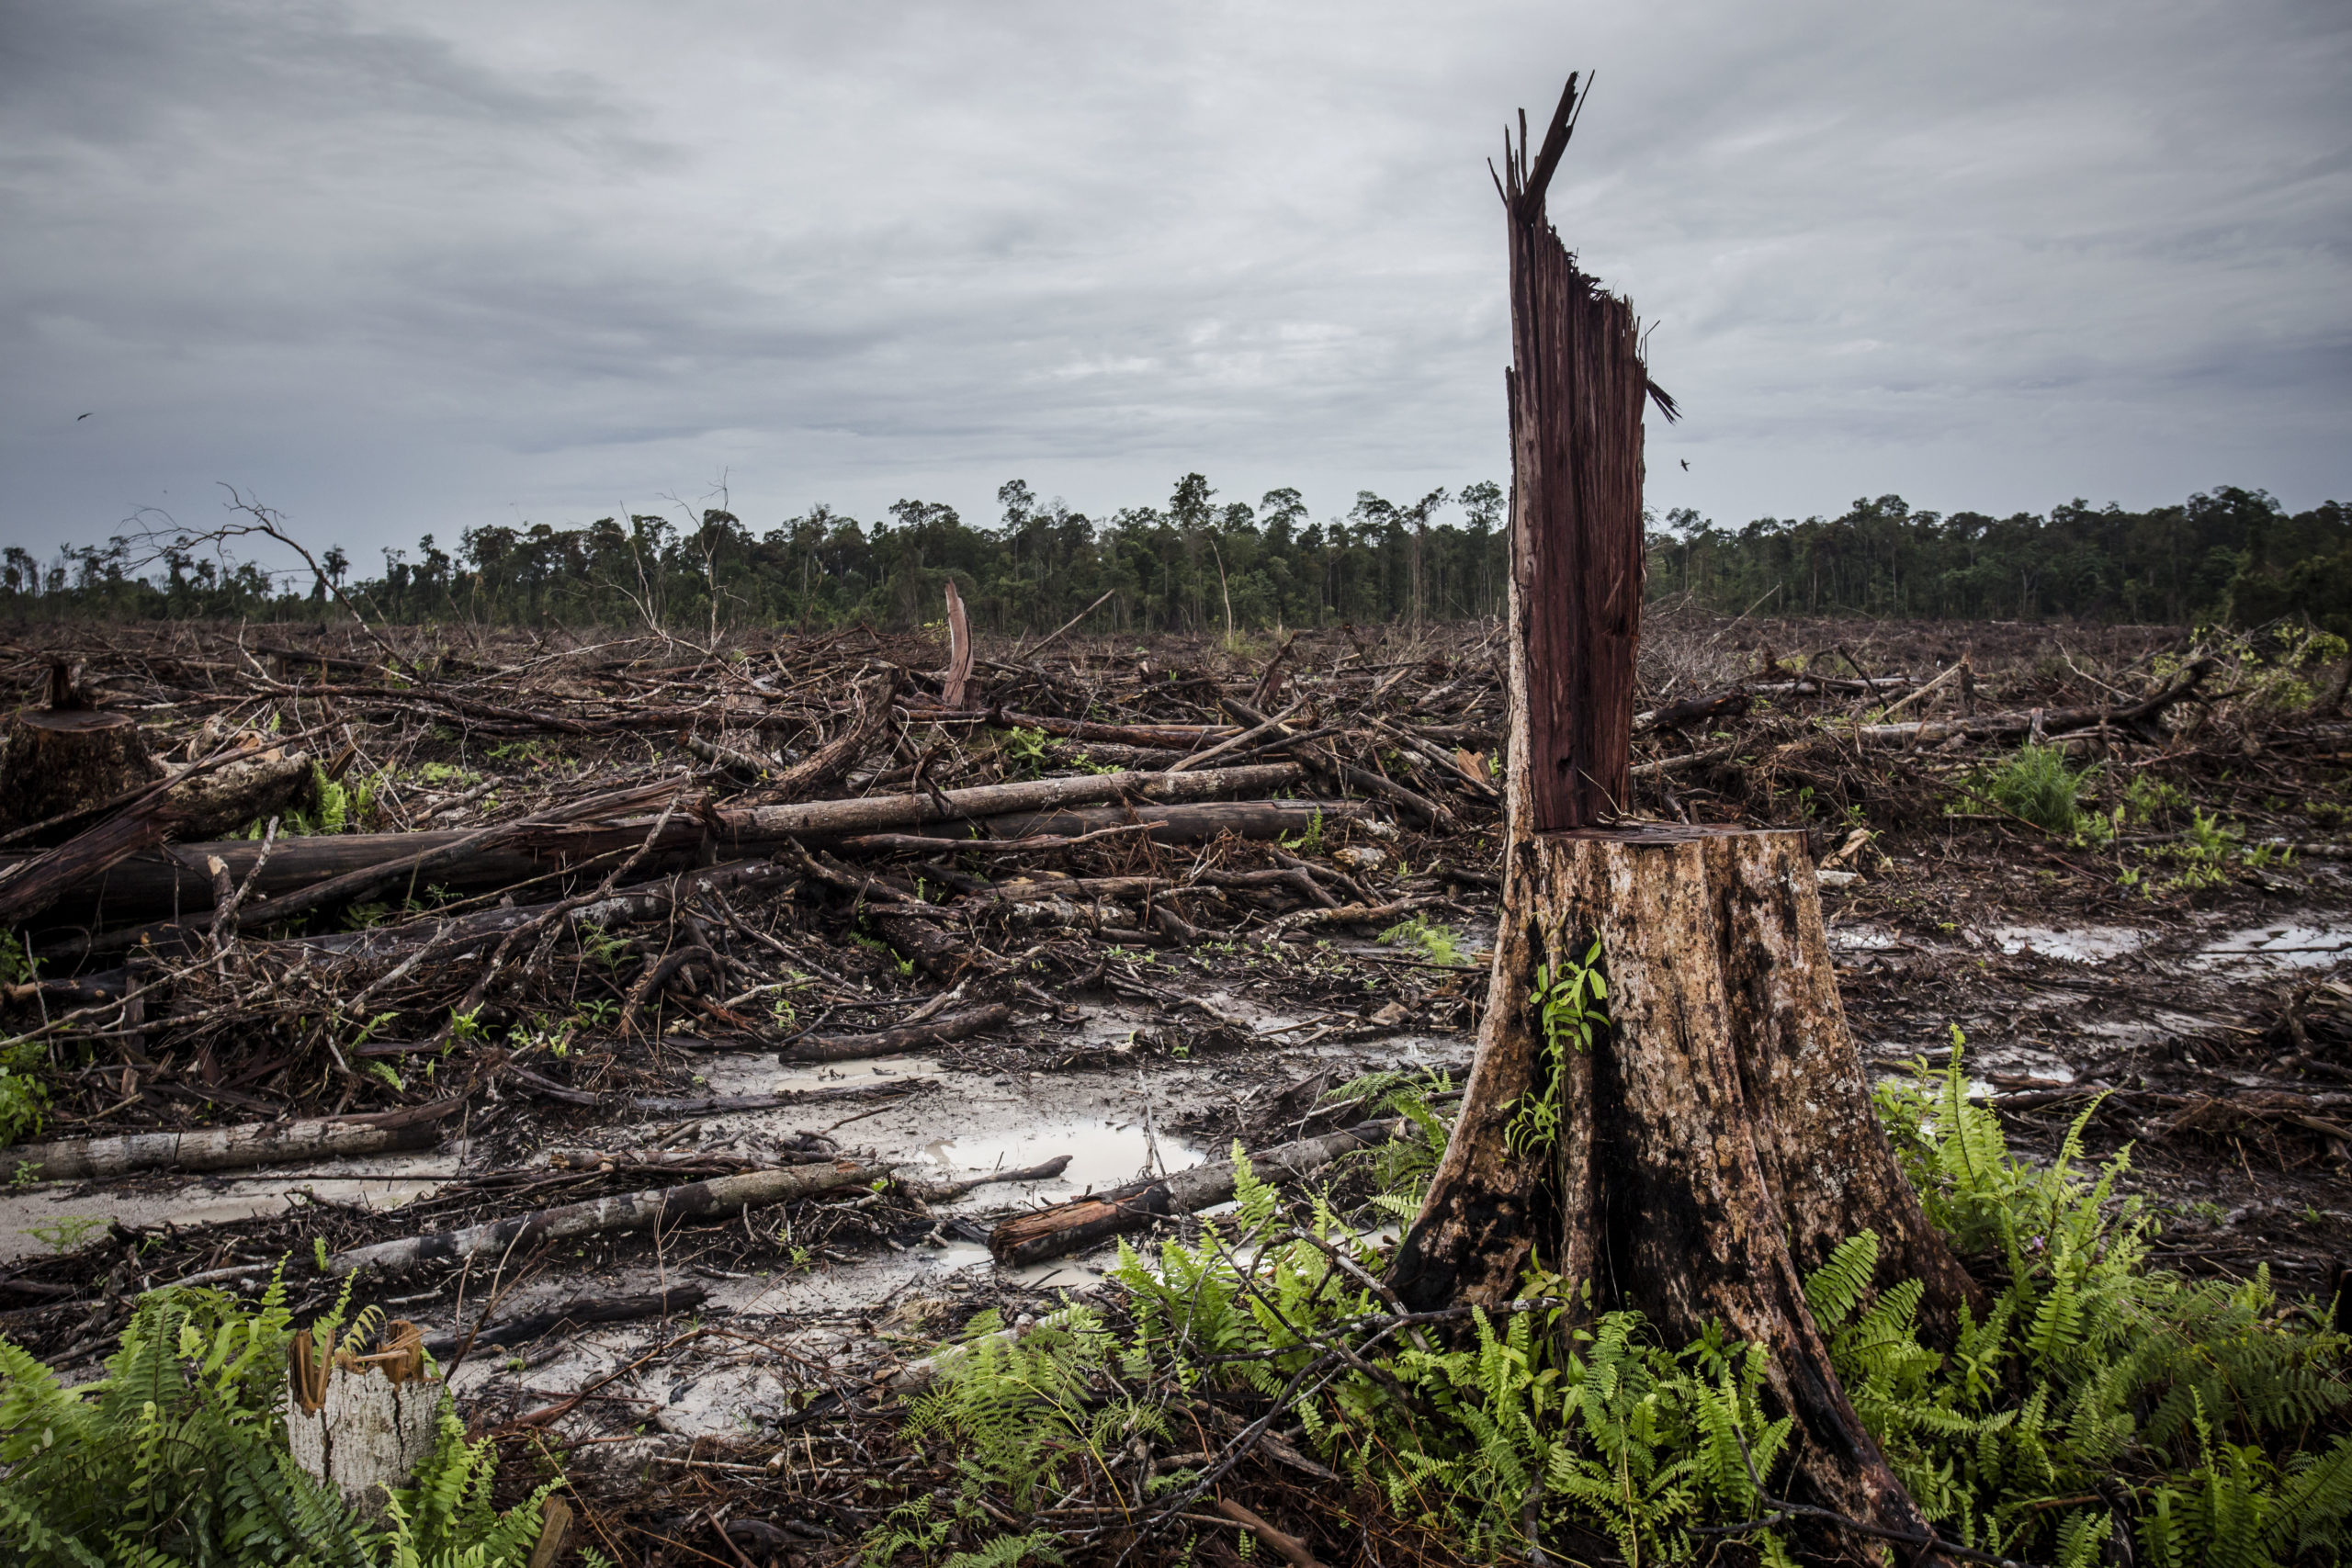 <p>Forest cleared to make space for oil palm plantations in West Kalimantan, Indonesia (Image: Ulet Ifansasti/Greenpeace)</p>